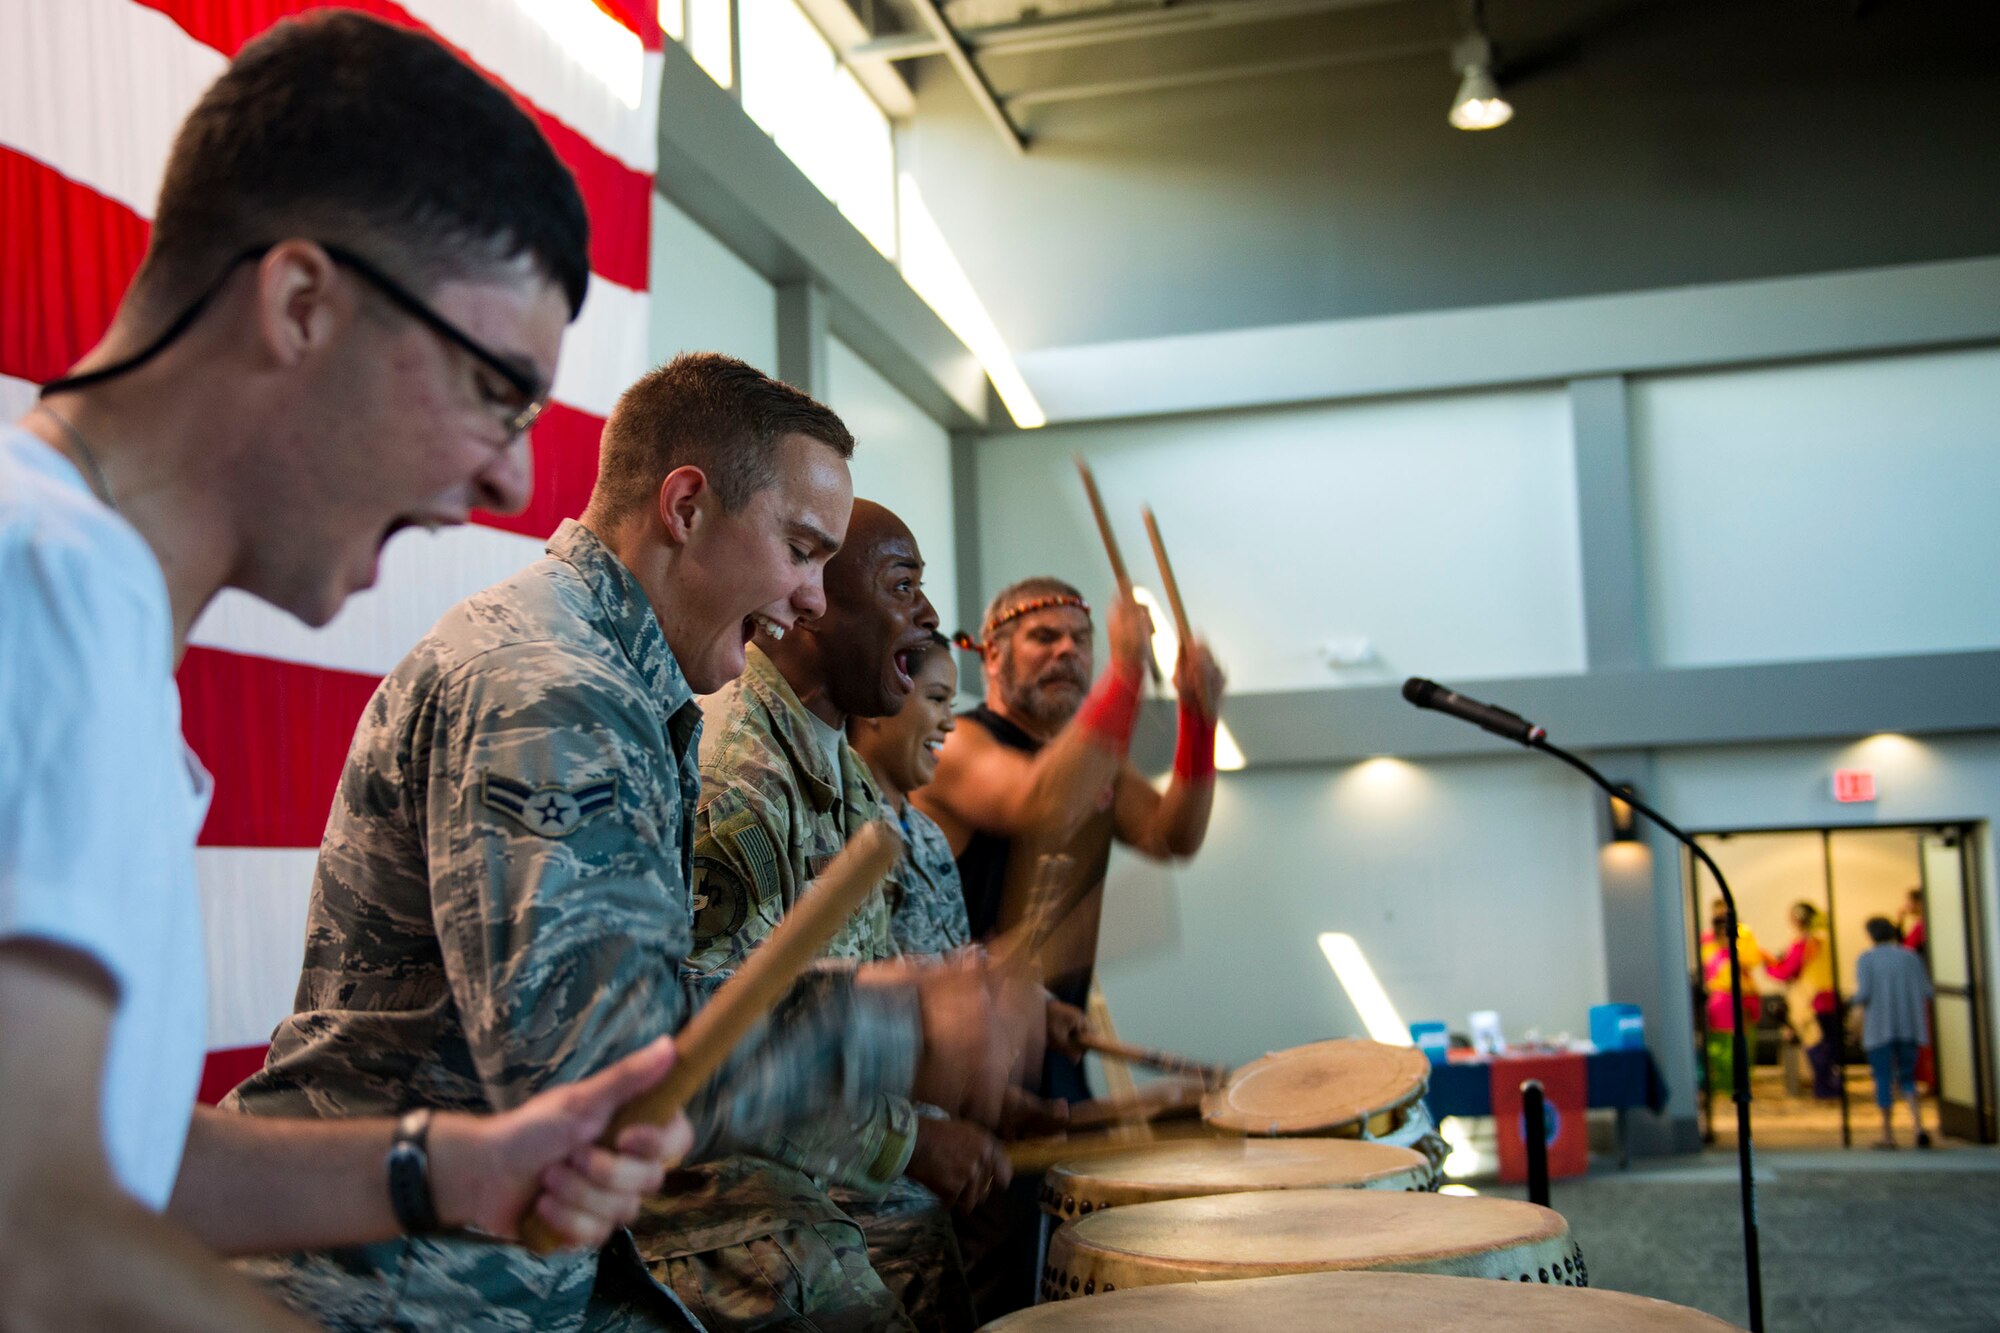 Team Moody Airmen participate in a drumming demonstration with the Tampa Taiko drummers during the 23d Wing Diversity Day, Sept. 14, 2018, at Moody Air Force Base, Ga. Diversity Day honored the cultures of all groups and organizations observed by the Department of Defense using forms of expression such as poems and native dances. The theme of this year was ’Many Cultures, One Voice: Stronger Through Inclusion And Equality’. (U.S. Air Force photo by Airman 1st Class Erick Requadt)